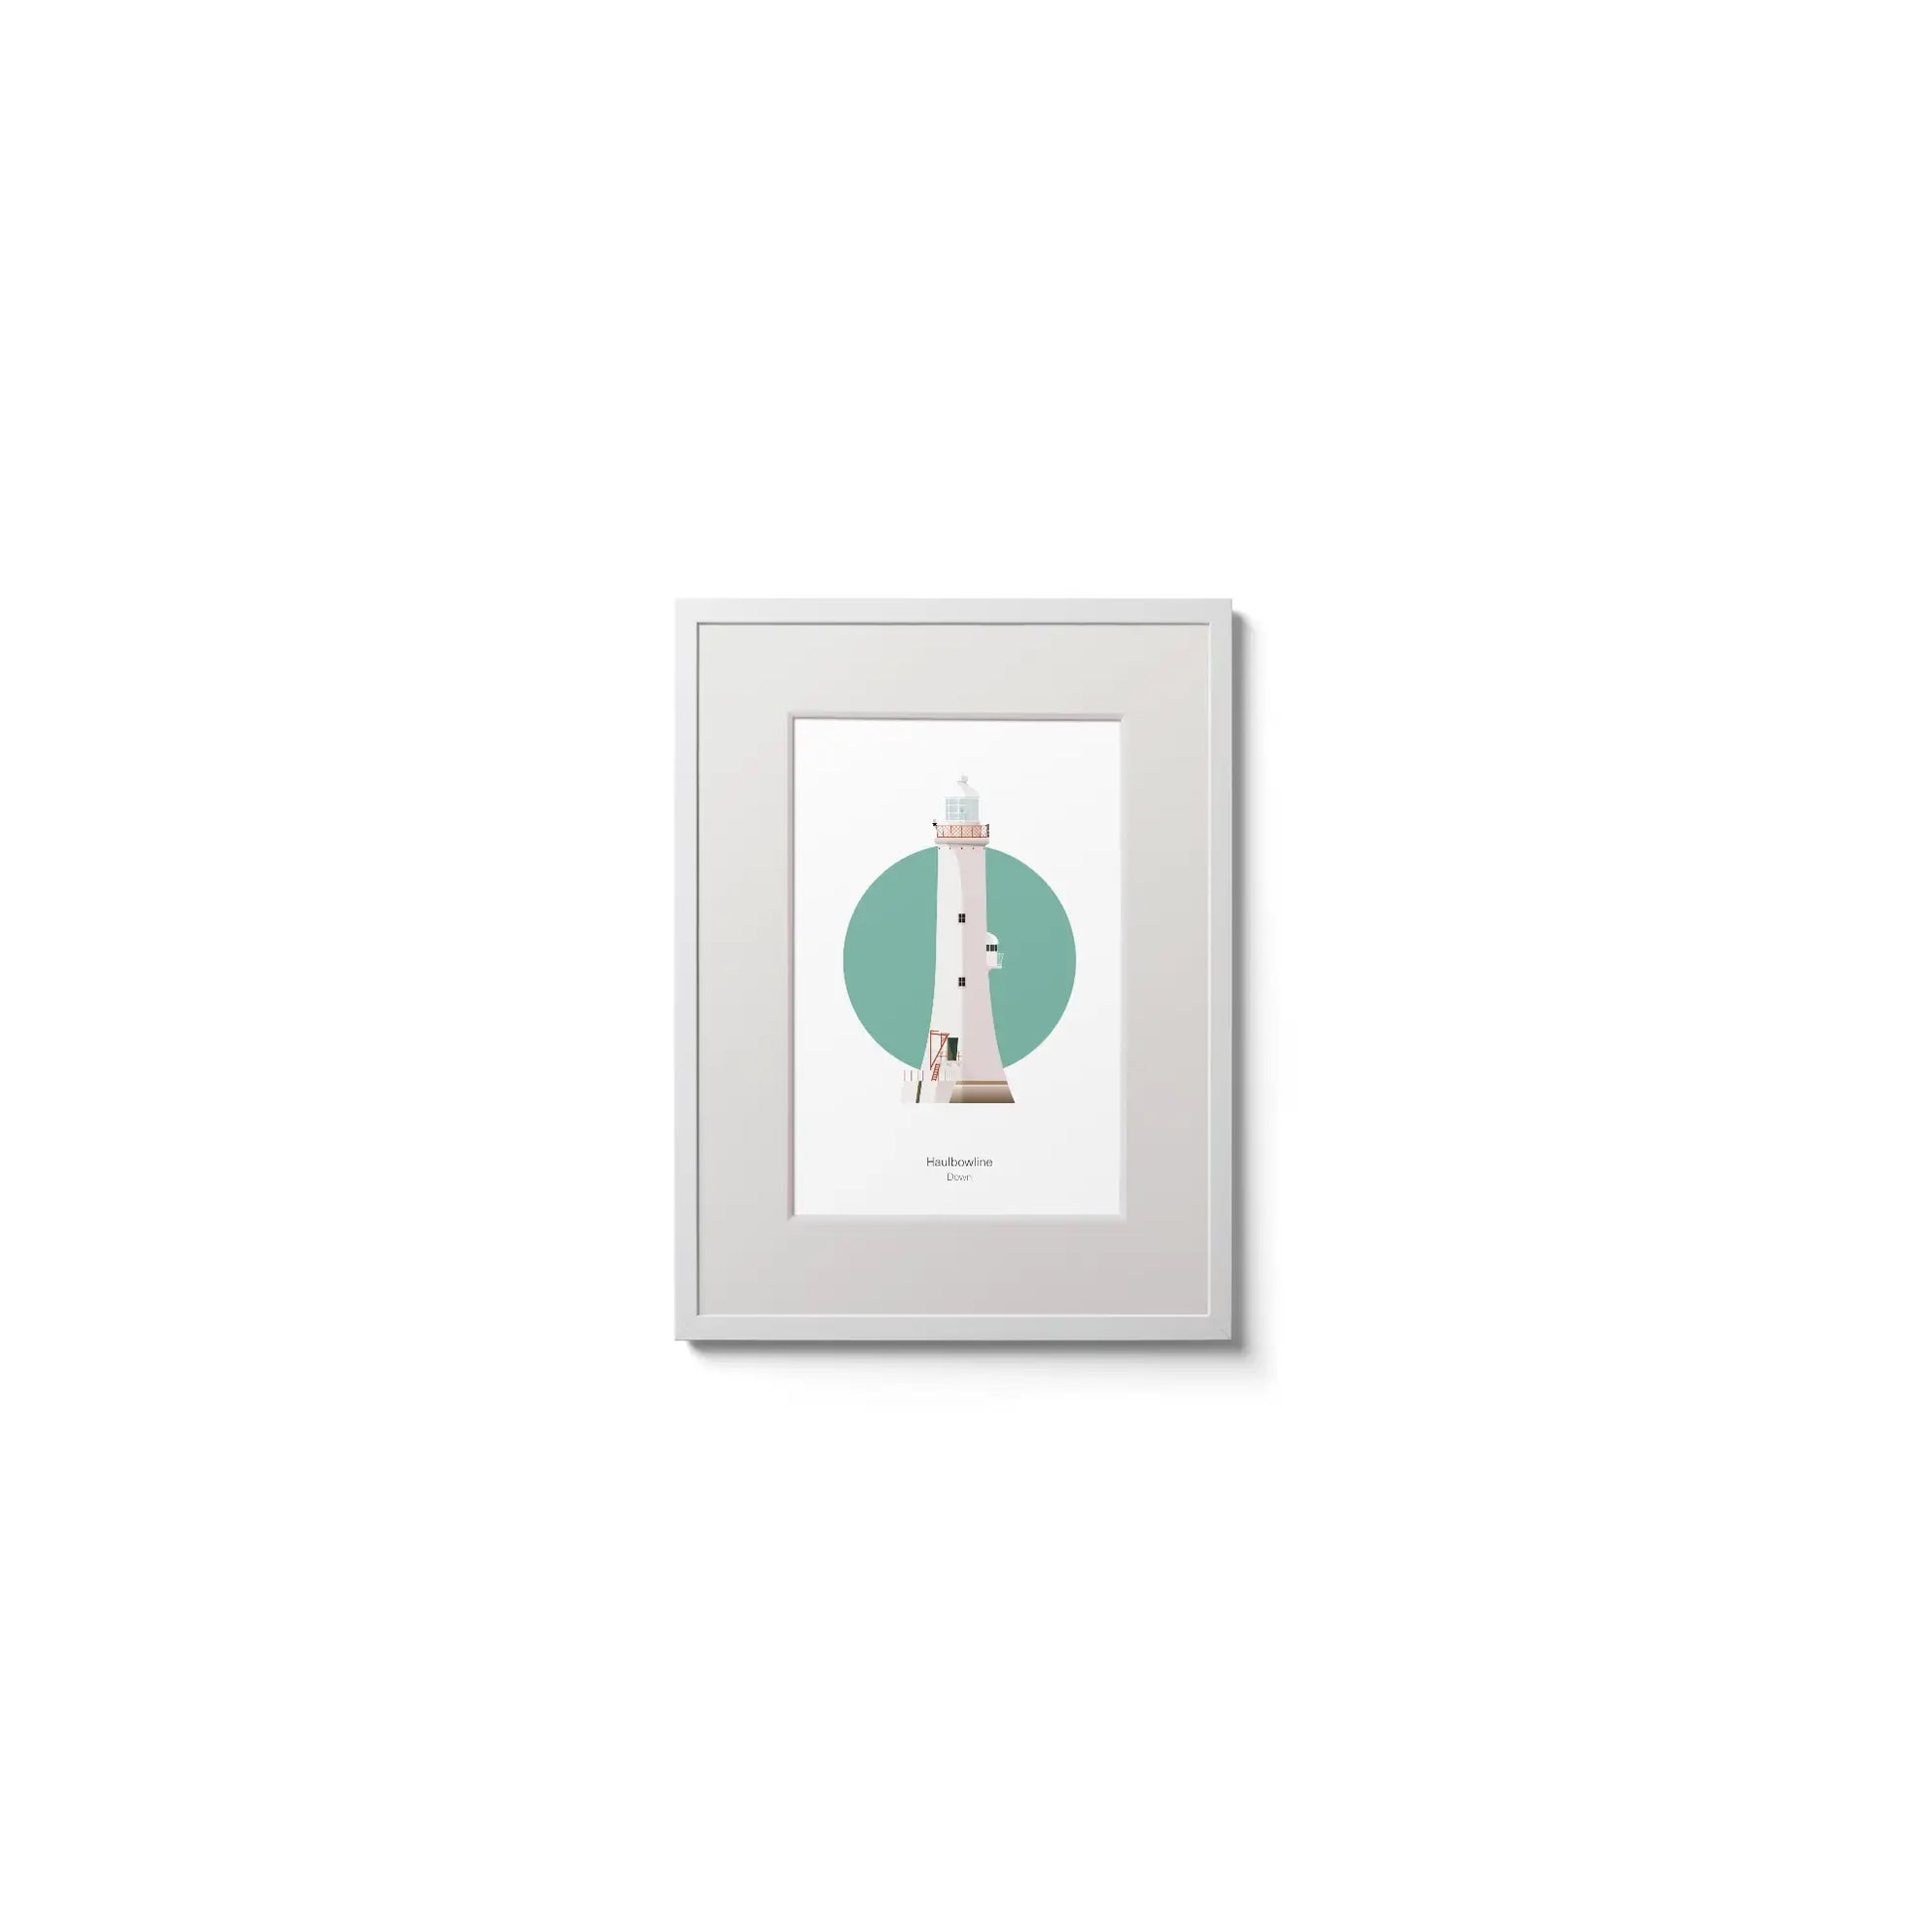 Illustration of Haulbowline lighthouse on a white background inside light blue square,  in a white frame measuring 15x20cm.